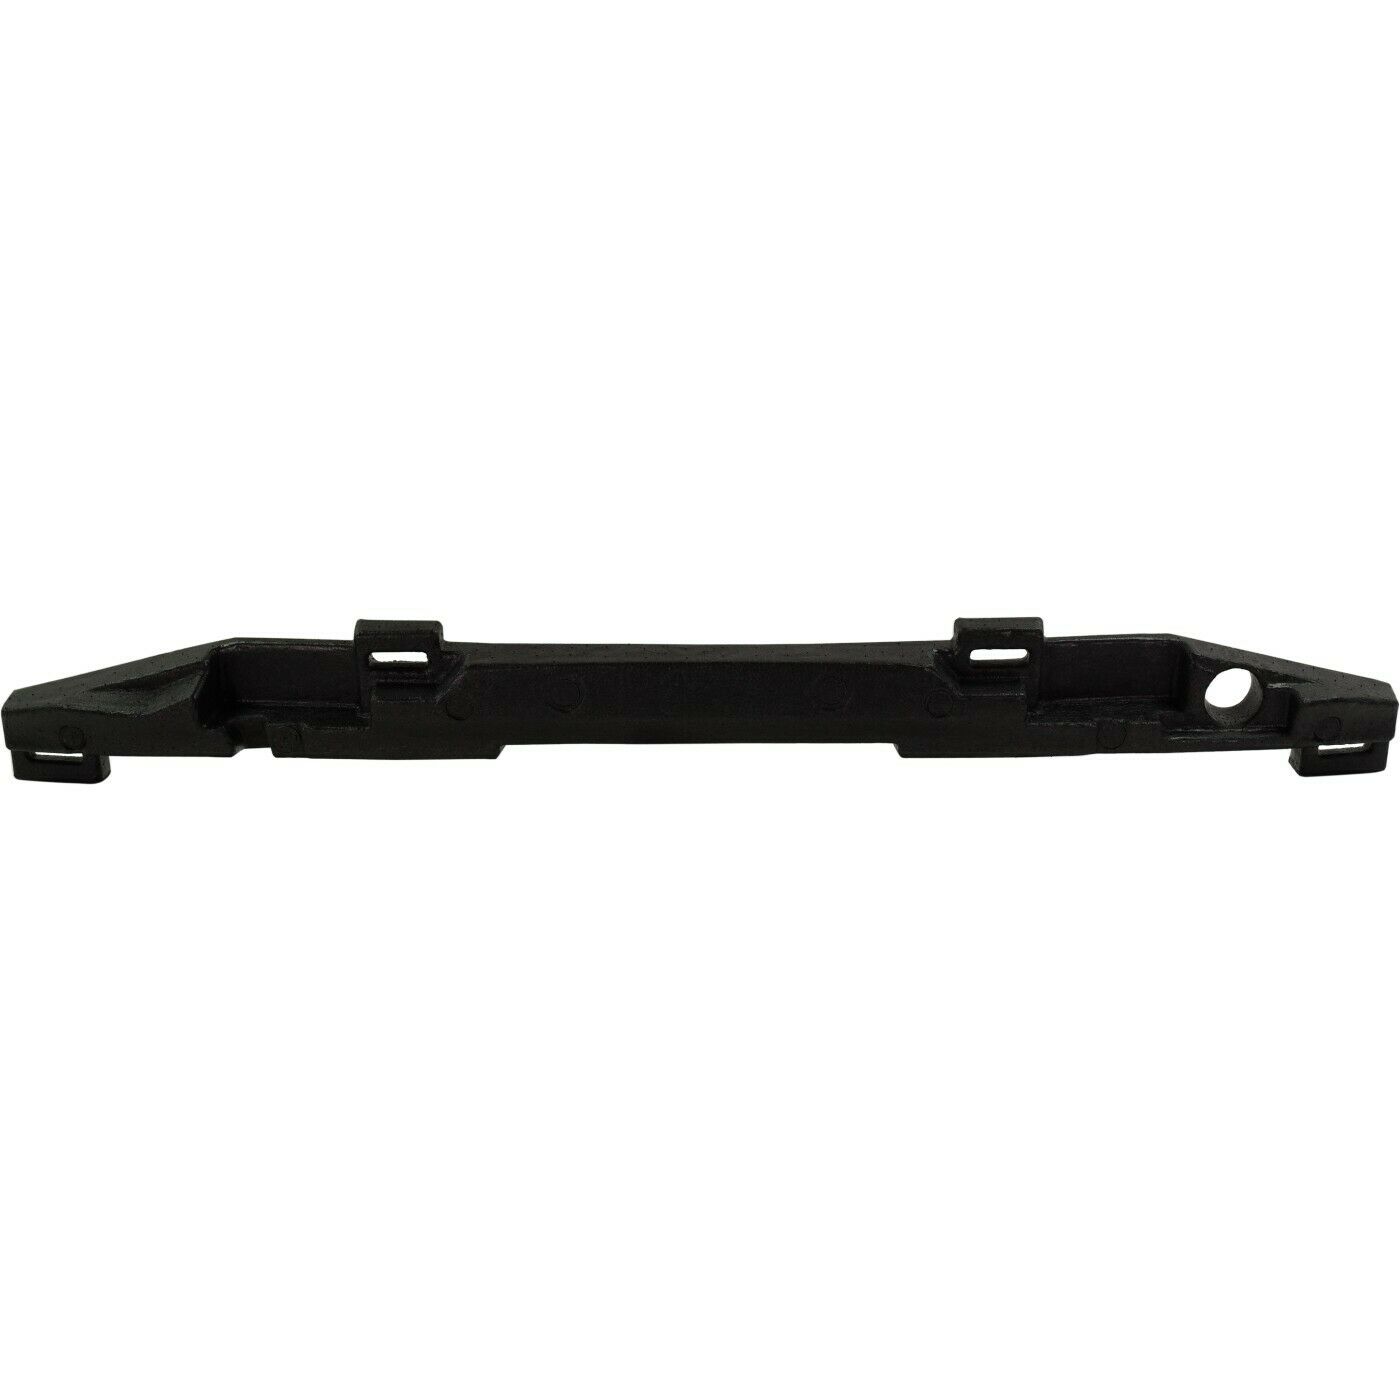 Aftermarket ENERGY ABSORBERS for GMC - TERRAIN, TERRAIN,18-21,Rear bumper energy absorber